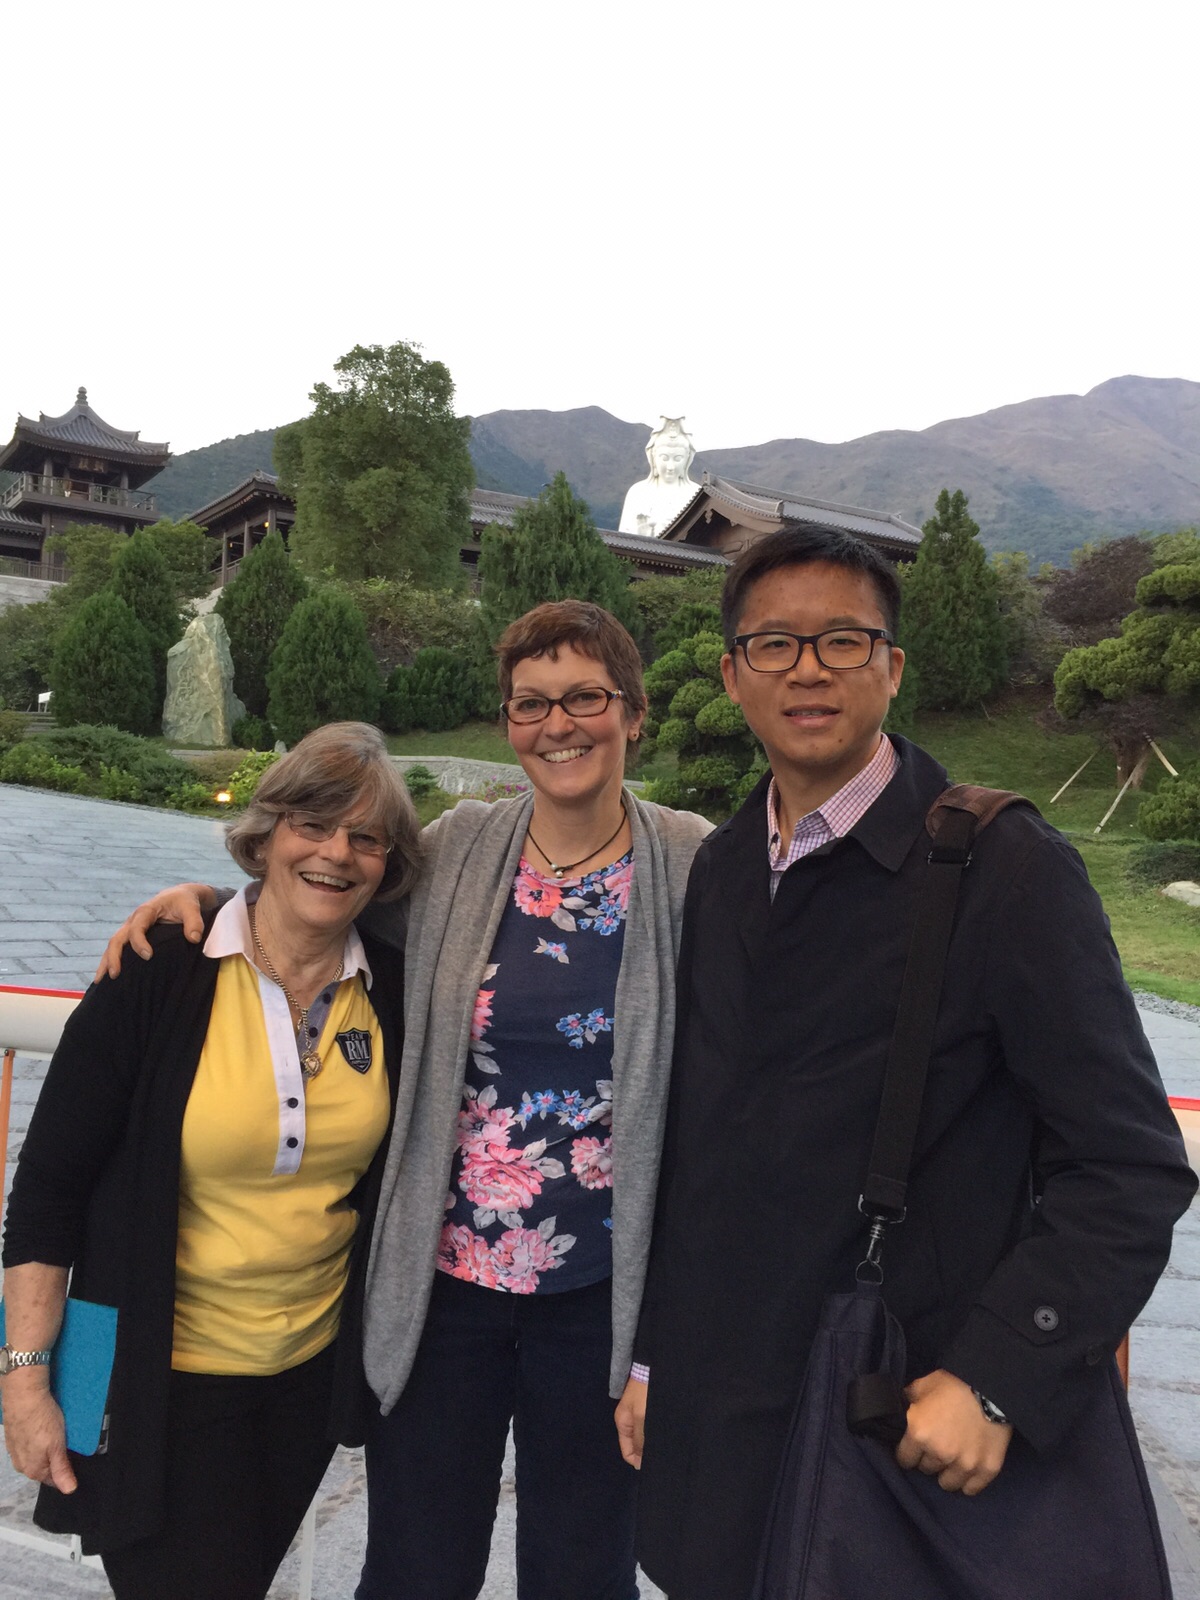 Frank the tour guide took photo with clients outside the Tsz Shan Monastery. The backdrop was the tall Goddess of Mercy Statue.